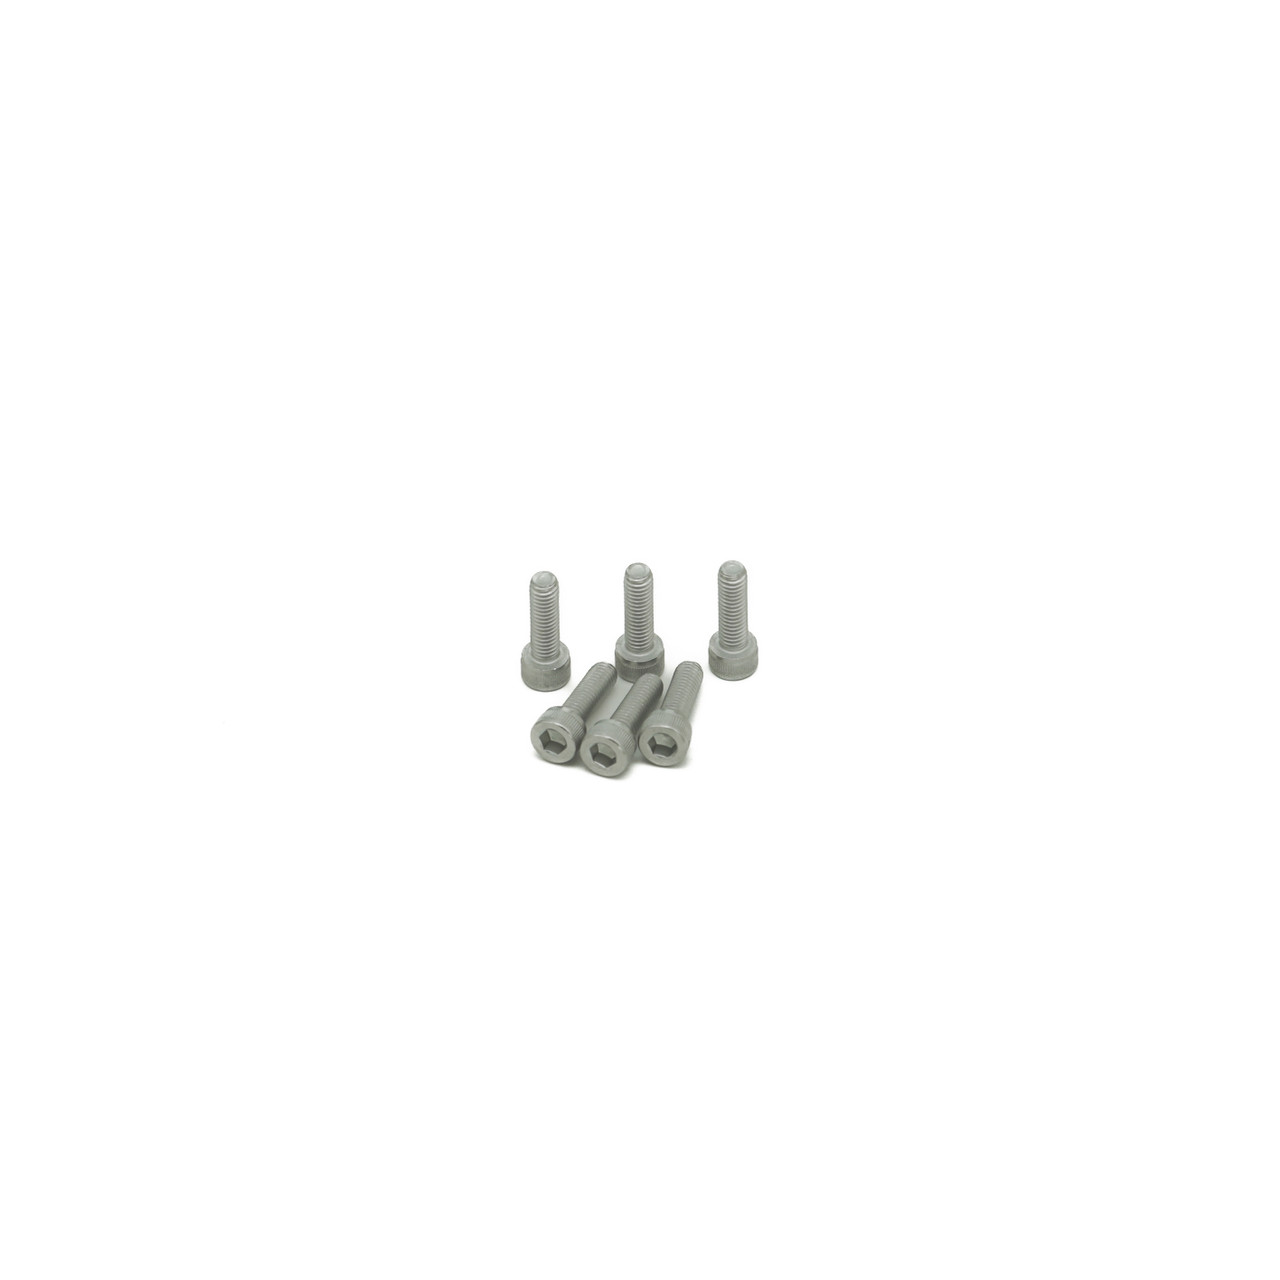 6mm x 20mm Stainless Steel Bolts, Allen Head, 6-pack (M6X20SS) on white backdrop.